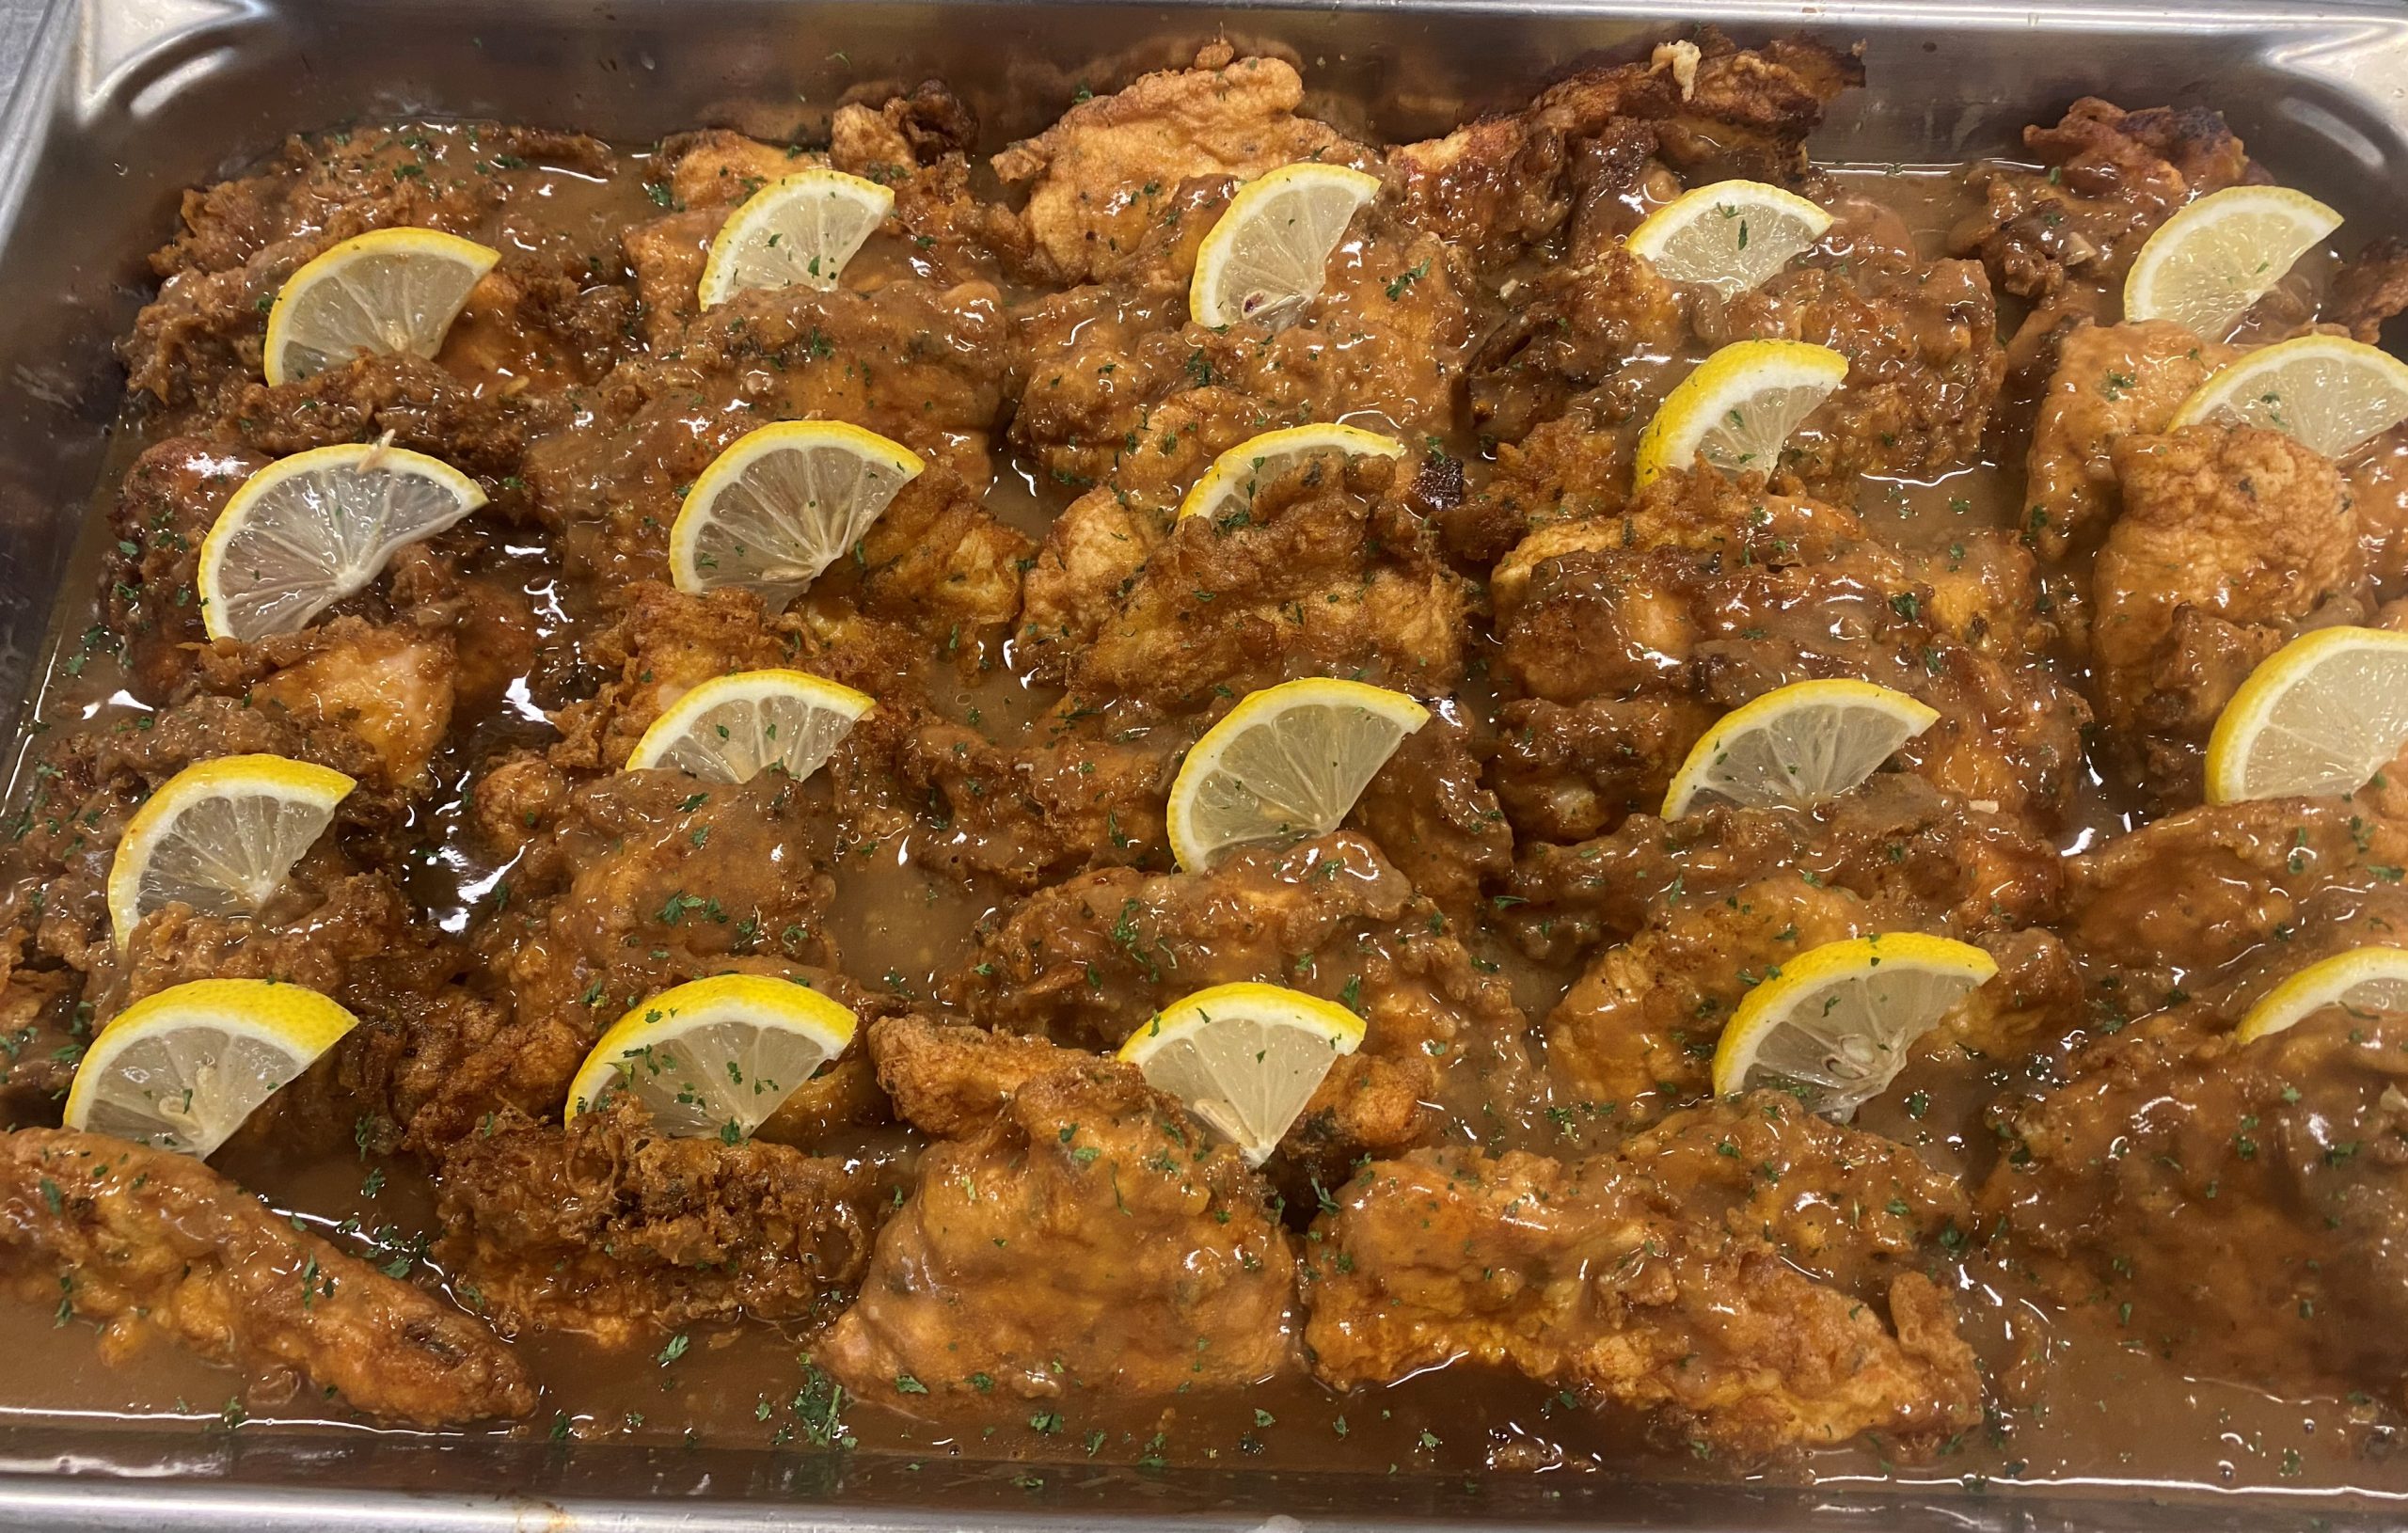 Fried chicken with lemon wedges on a tray.